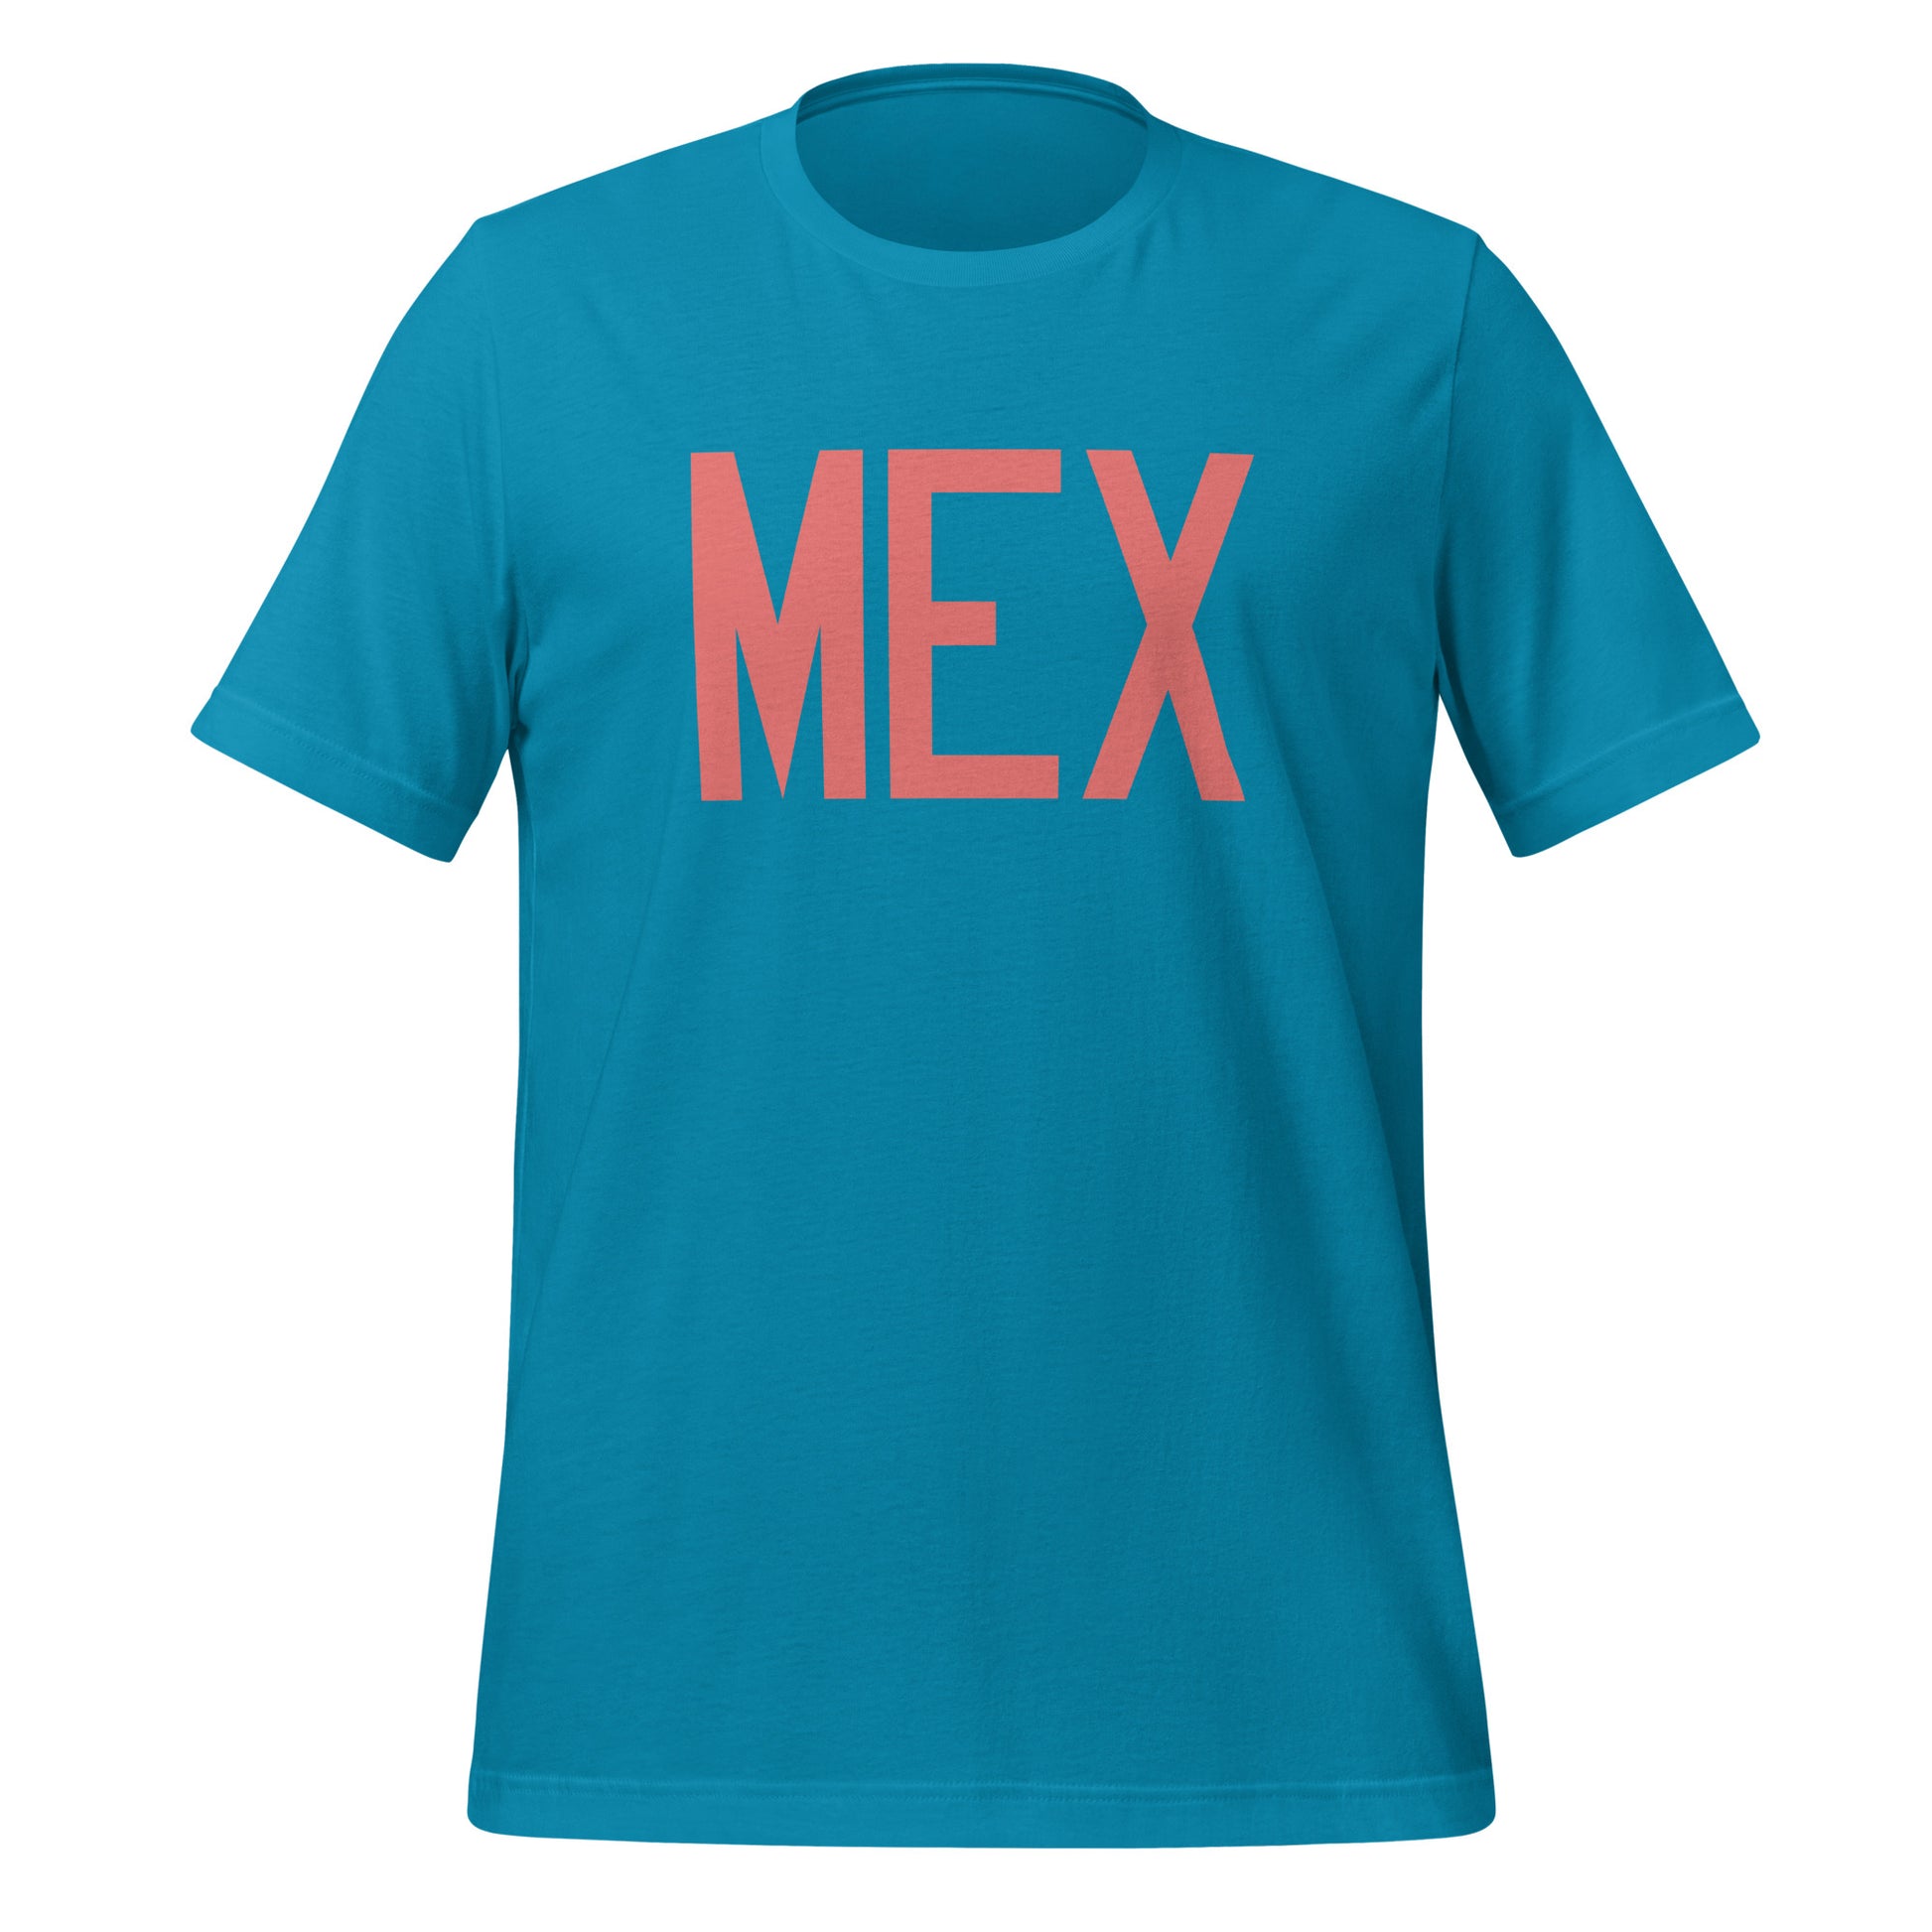 Aviation Enthusiast Unisex Tee - Pink Graphic • MEX Mexico City • YHM Designs - Image 06